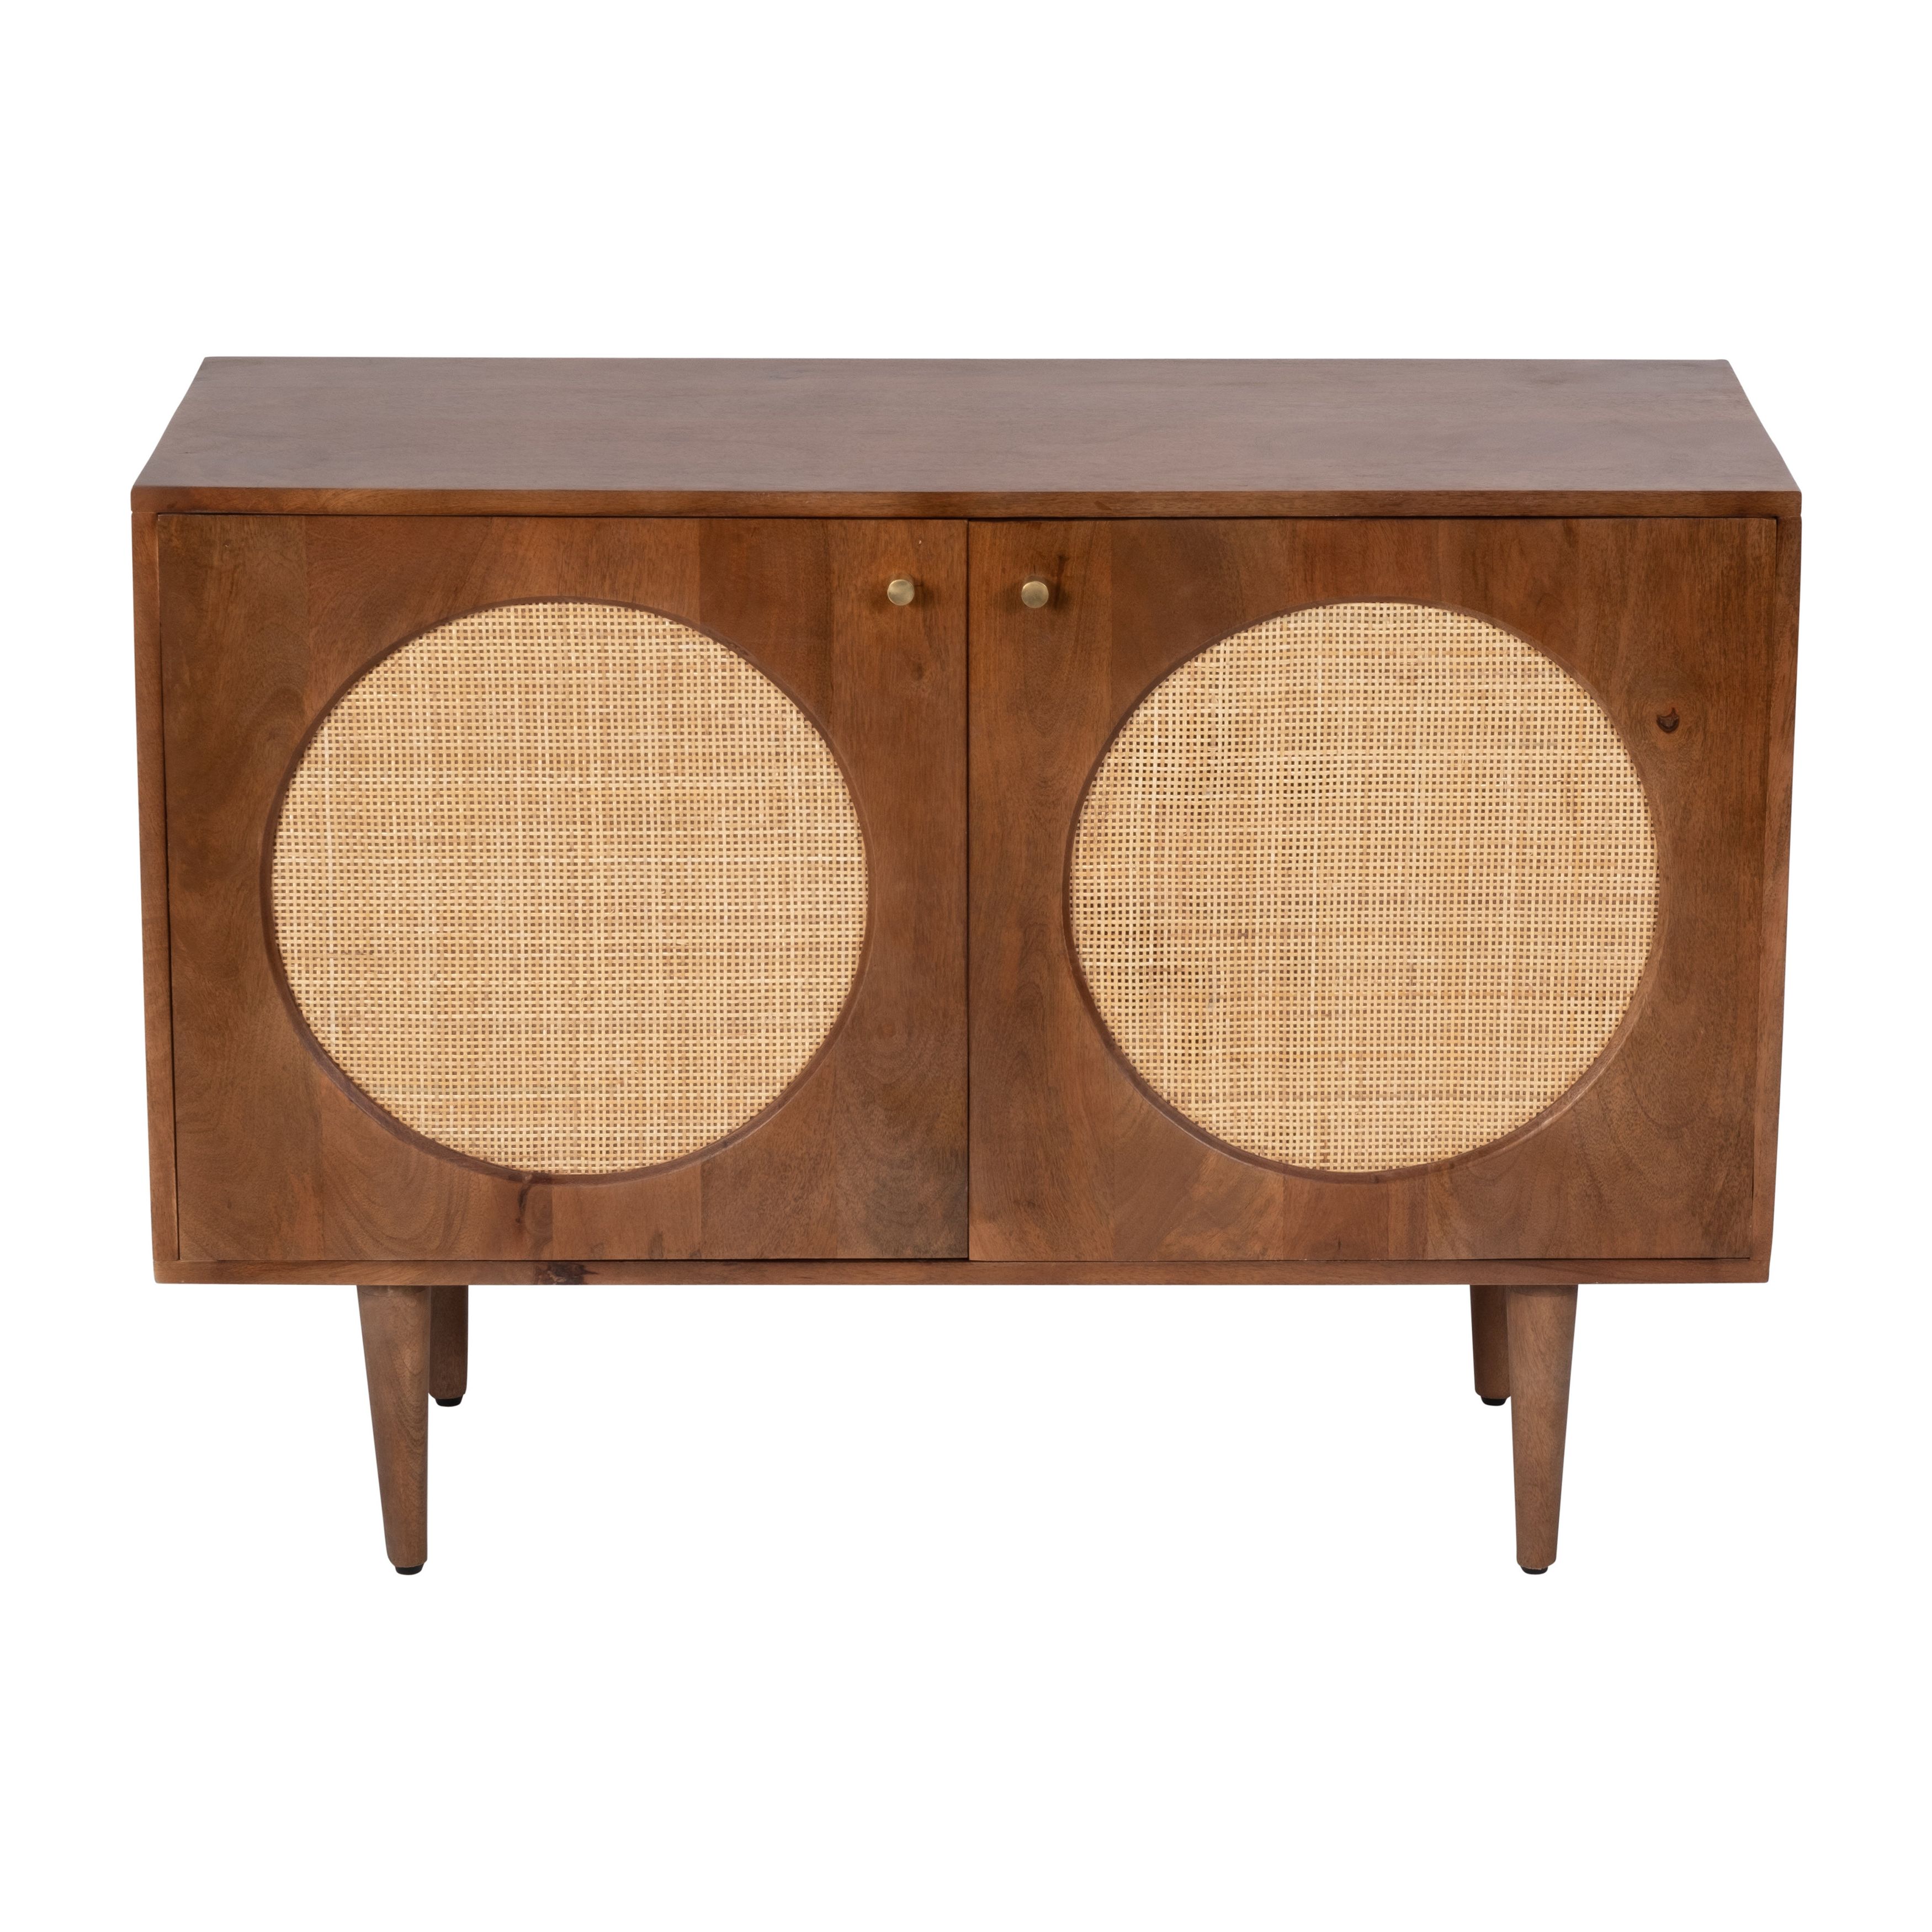 Farber 28"h Wood 2 Door Sideboard In Brown Finish With Mango Wood, Mdf And  Cane Construction As A Rustic And Stylish Console Cabinet (View 12 of 15)